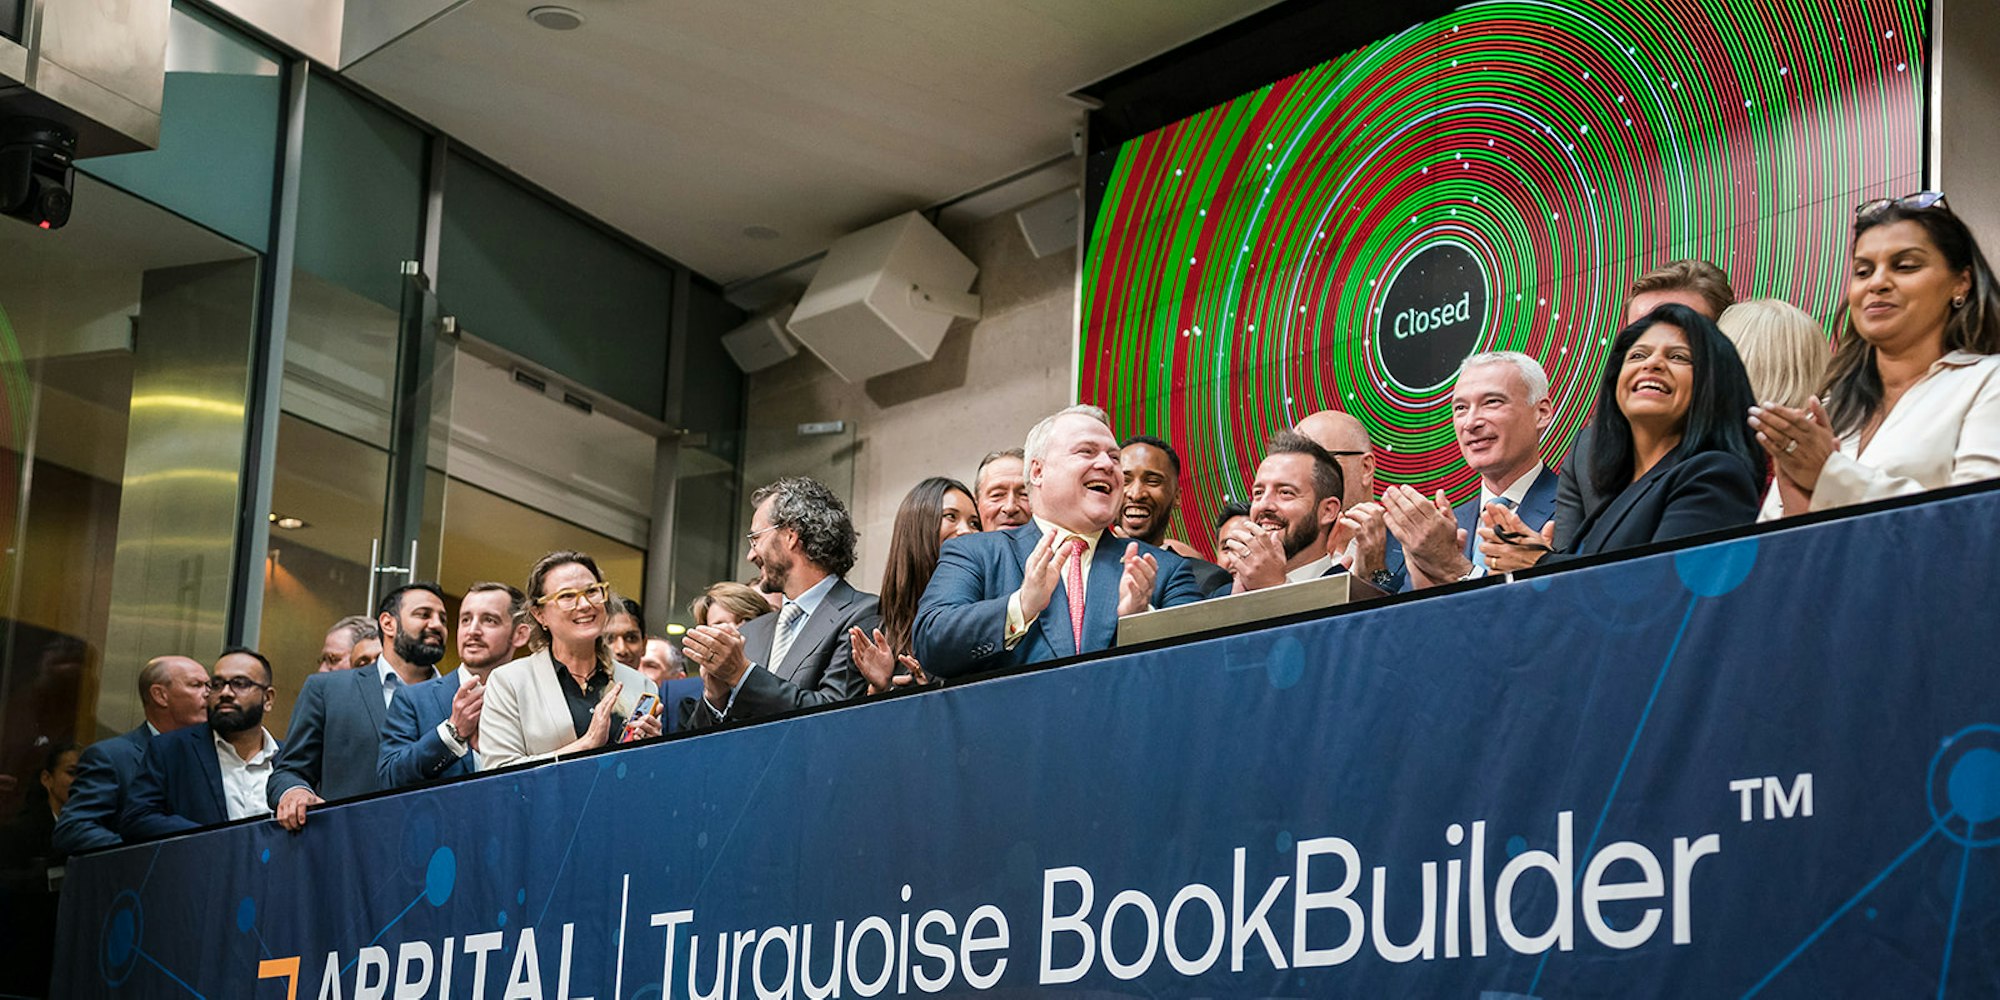 Celebrating the launch of Appital Turquoise BookBuilder™